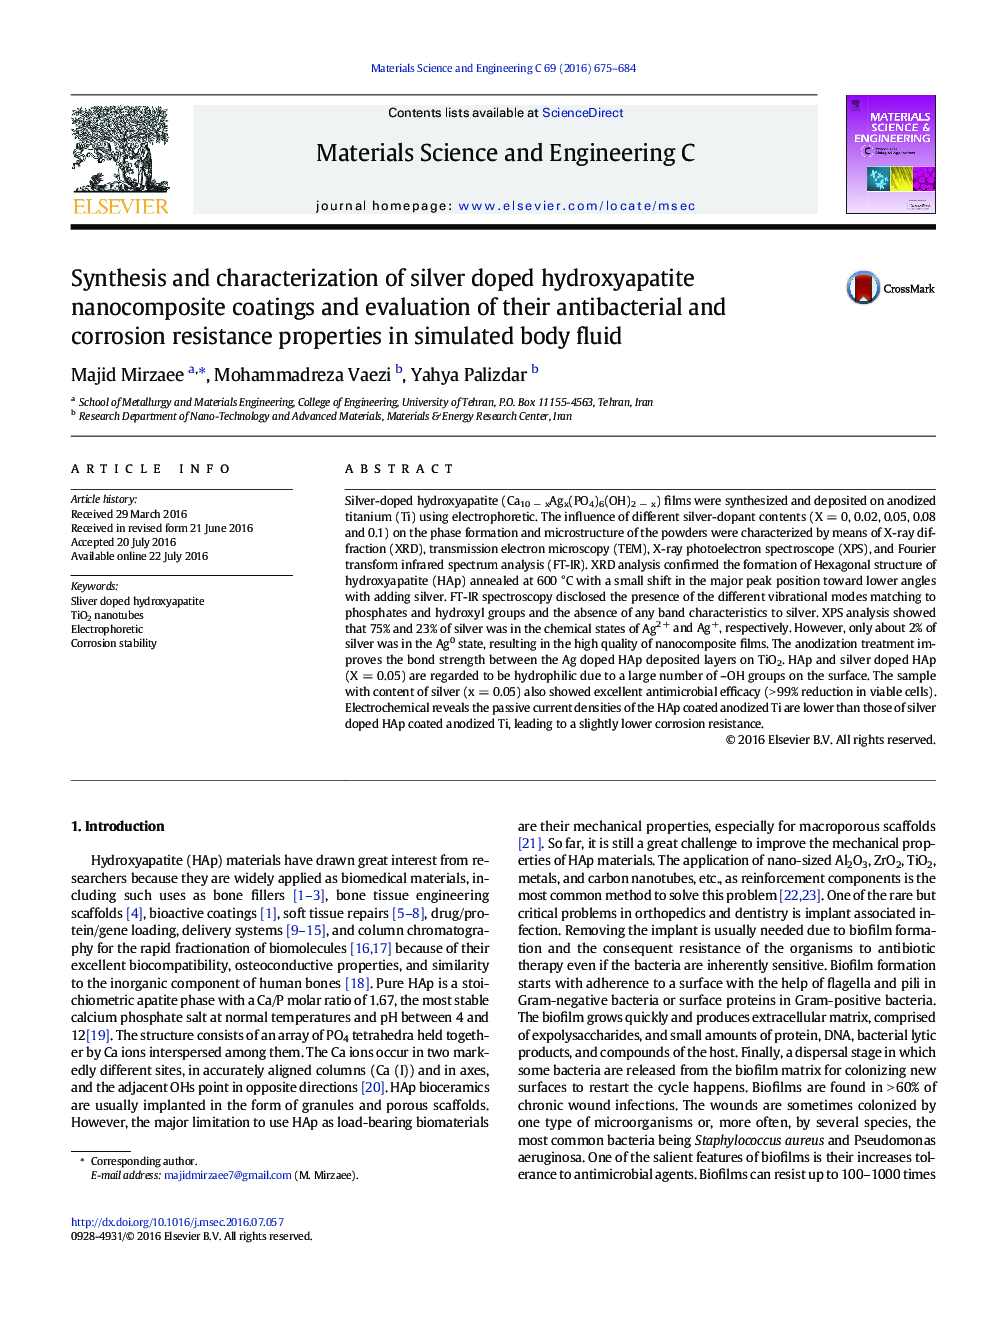 Synthesis and characterization of silver doped hydroxyapatite nanocomposite coatings and evaluation of their antibacterial and corrosion resistance properties in simulated body fluid